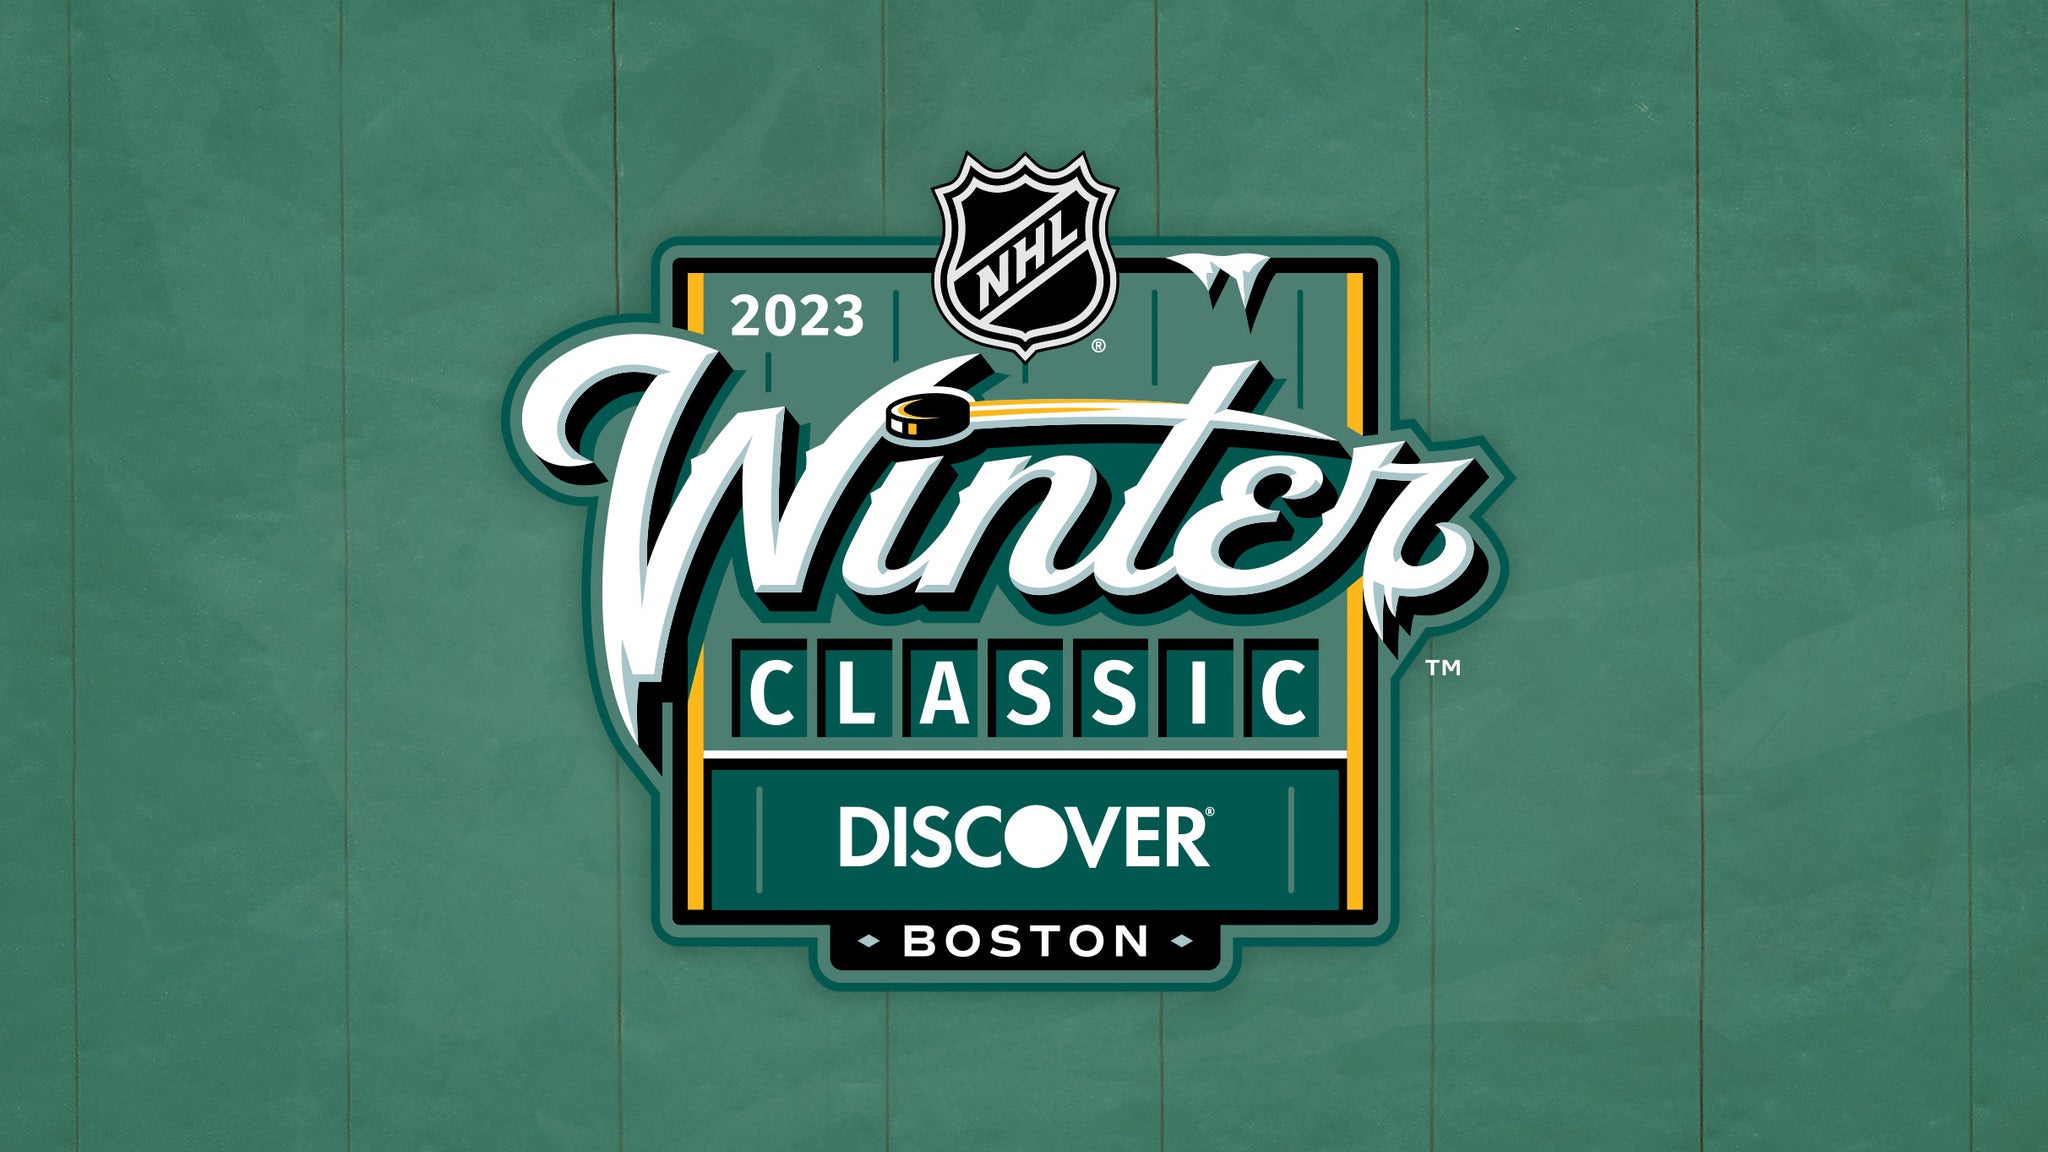 NHL Winter Classic® Tickets 20222023 NHL Tickets & Schedule